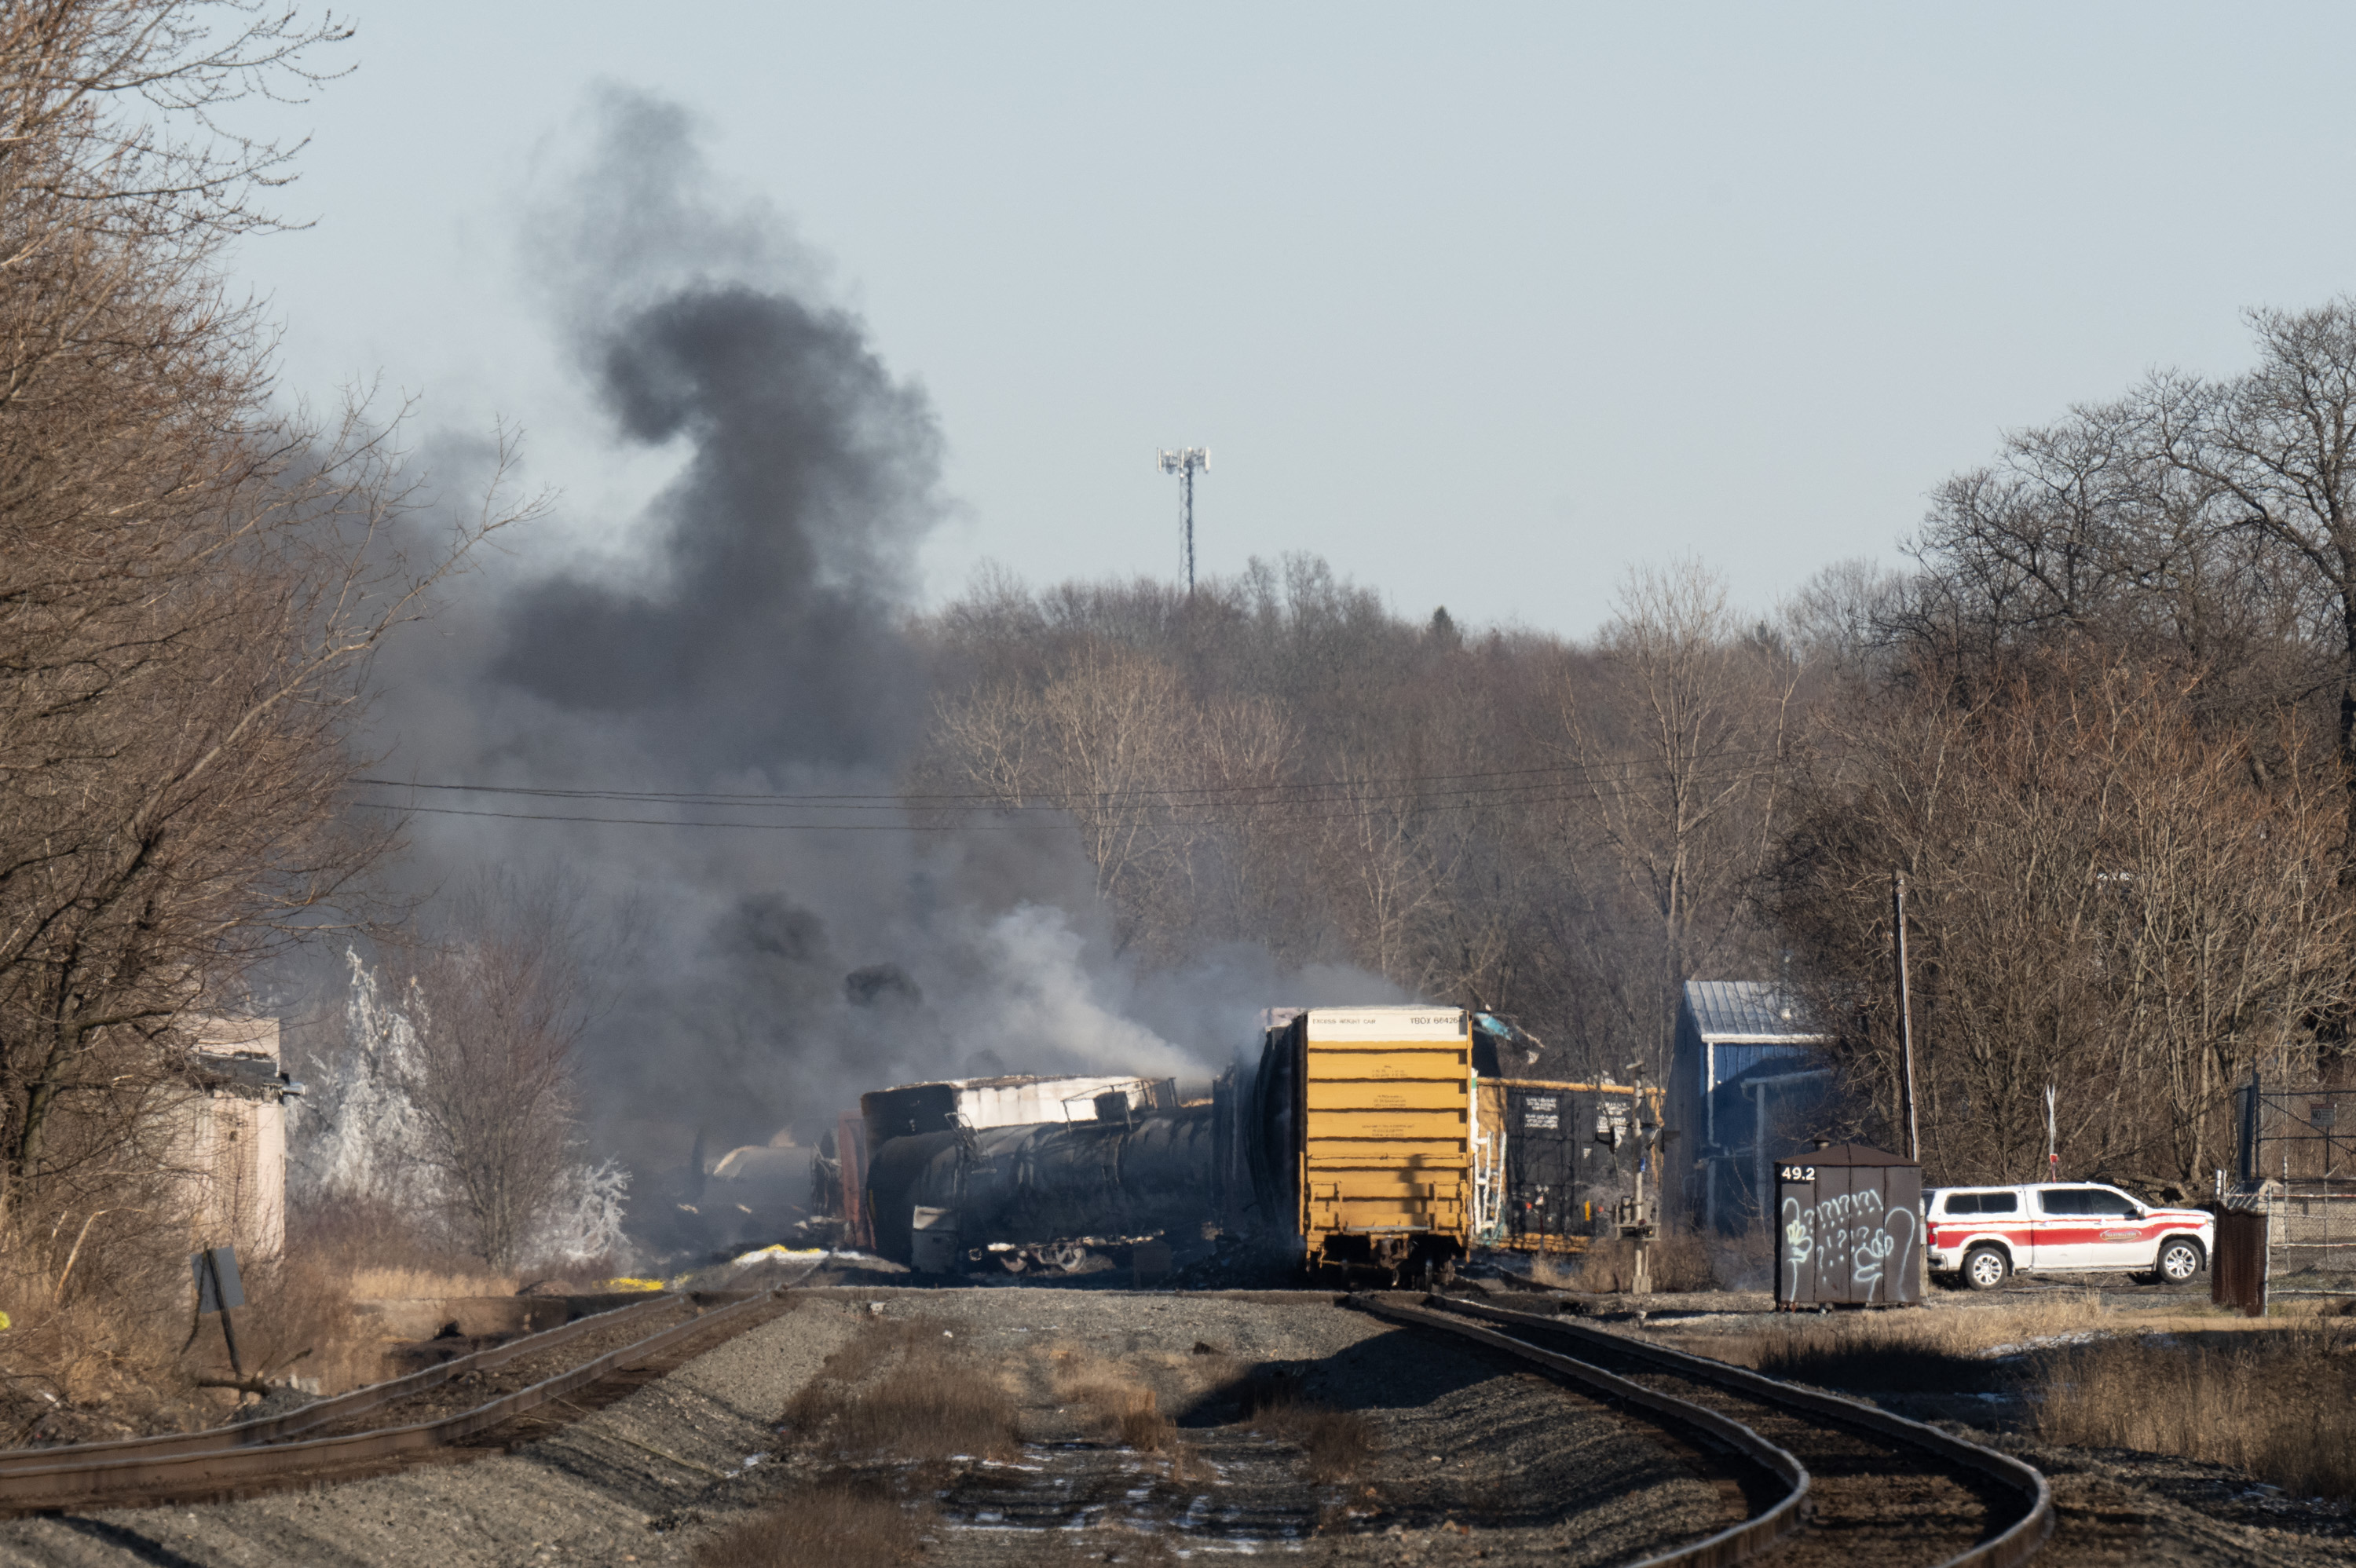 How to Test Drinking Water for Toxic Chemicals After Ohio Train Derailment